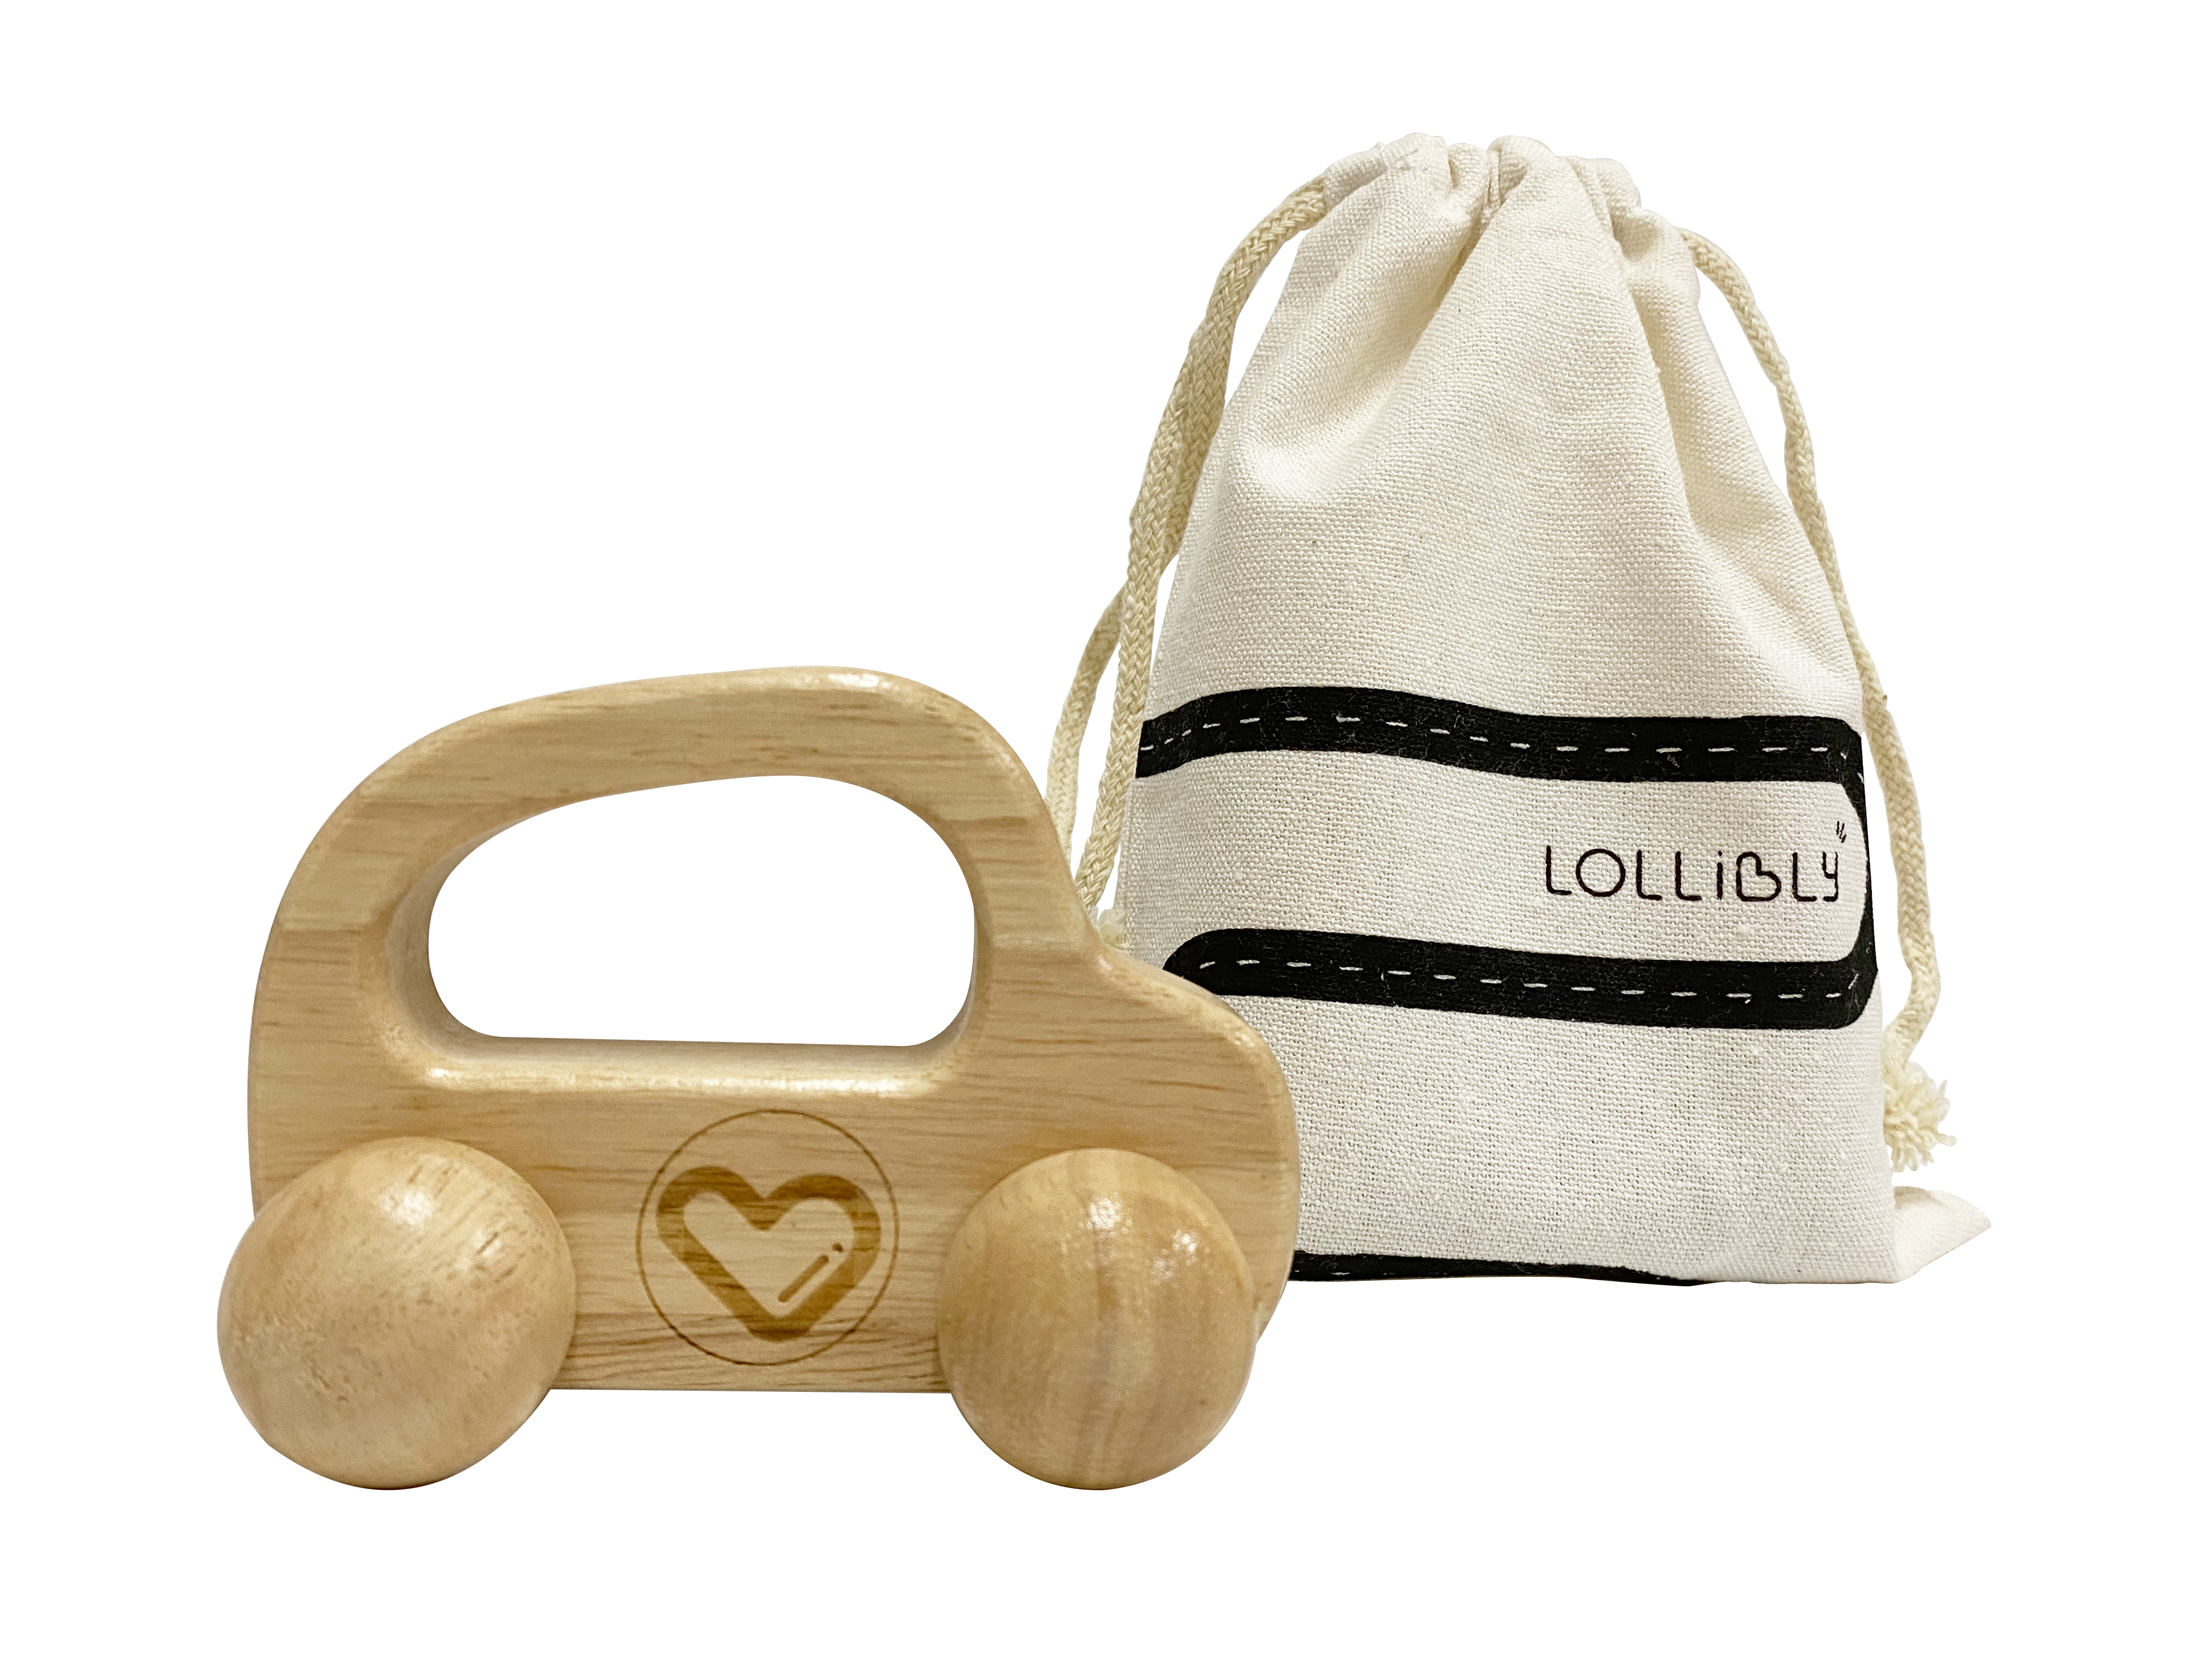 Lollibly Wooden Toy Car with Drawstring Bag